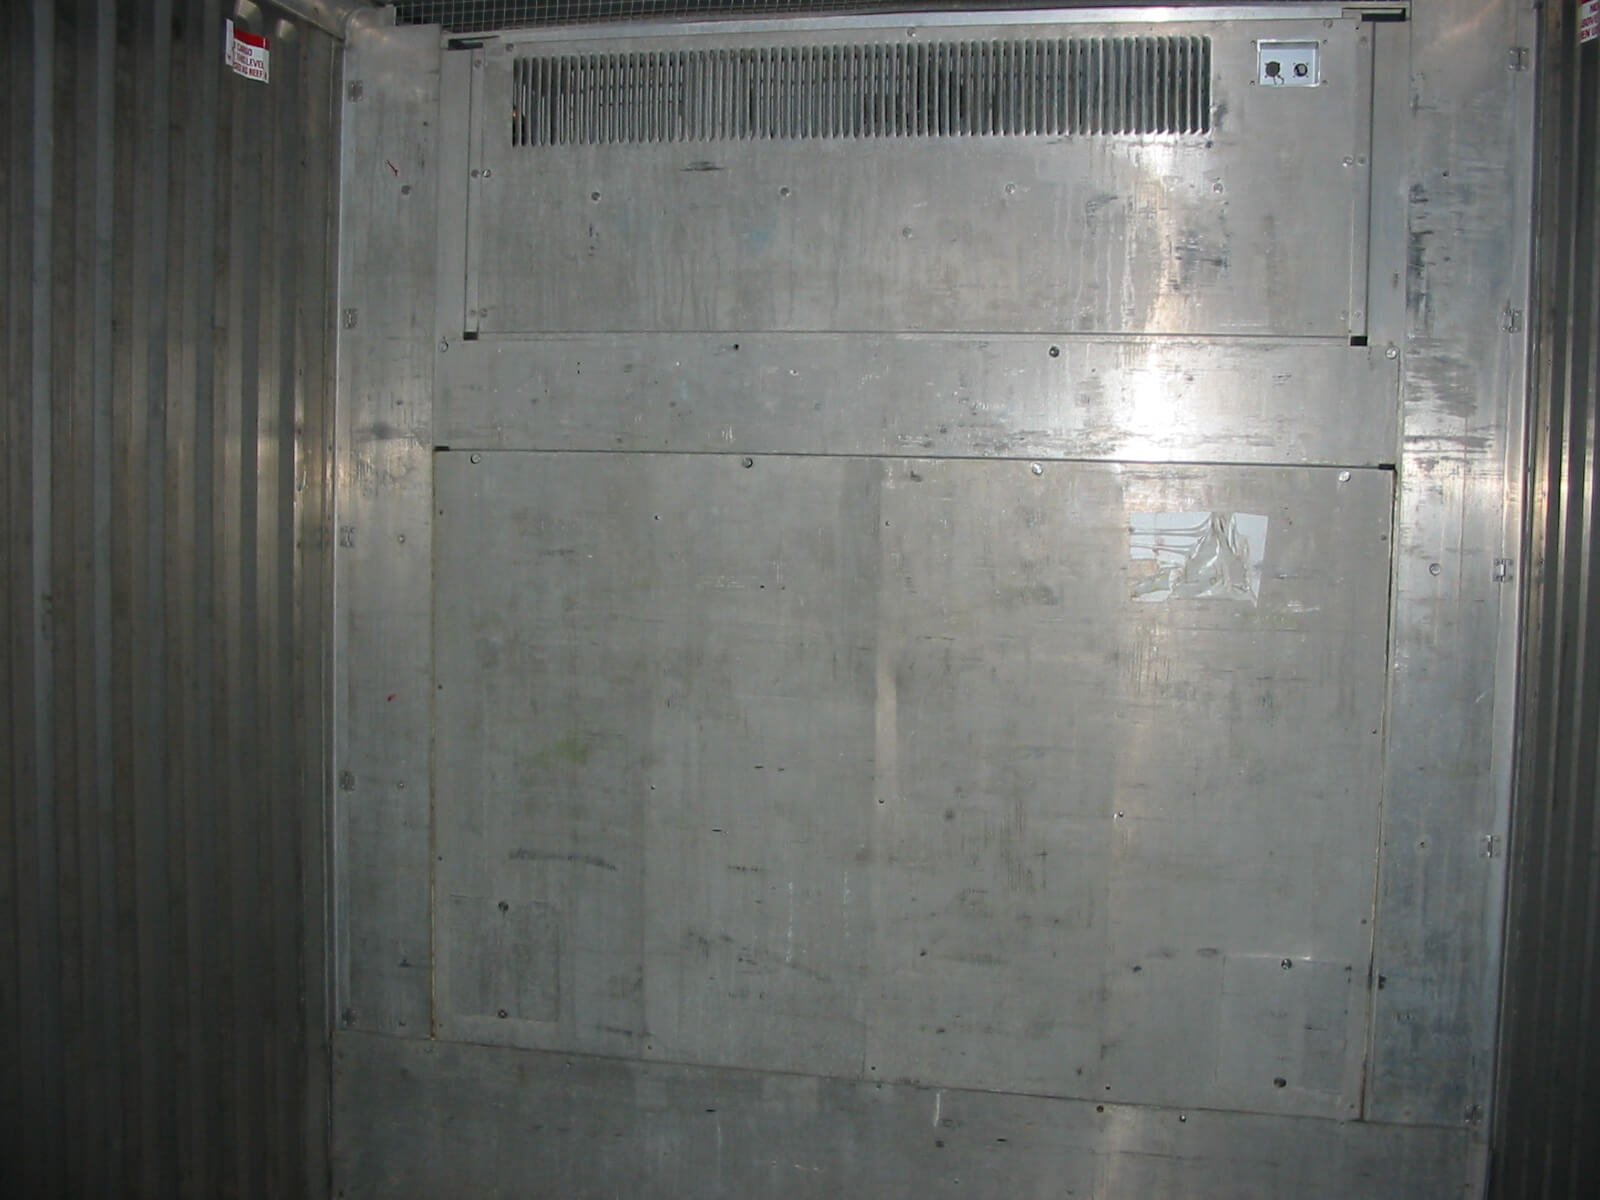 https://cdn.cmgcontainers.net/uploads/product-gallery-images/40ft-hc-insulated-used-shipping-container-3.jpeg